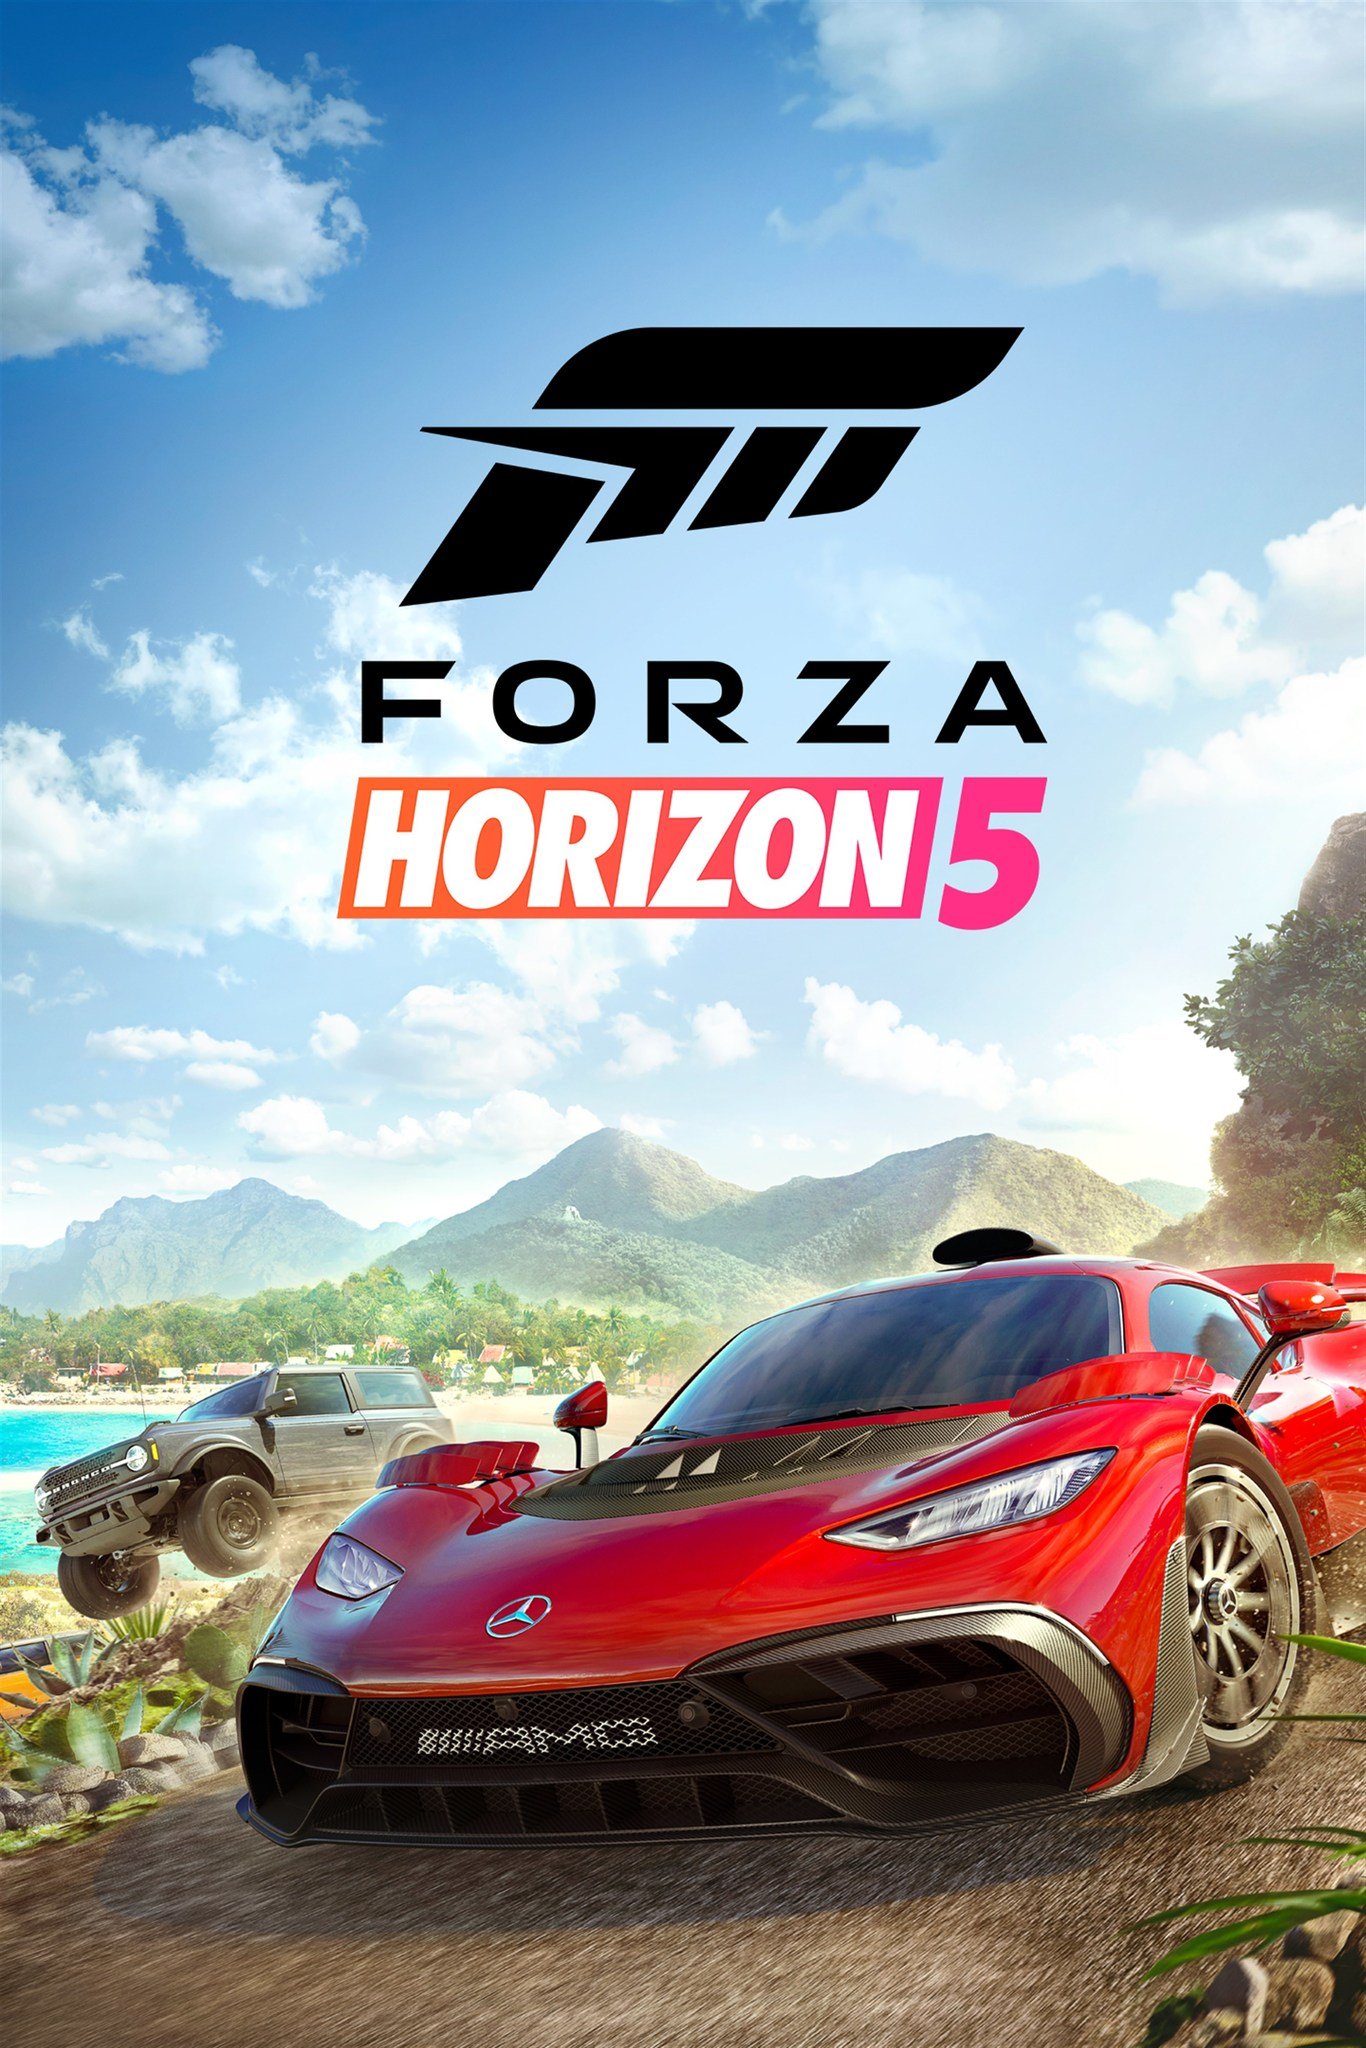 Forza Horizon 5 is officially available on Xbox Game Pass